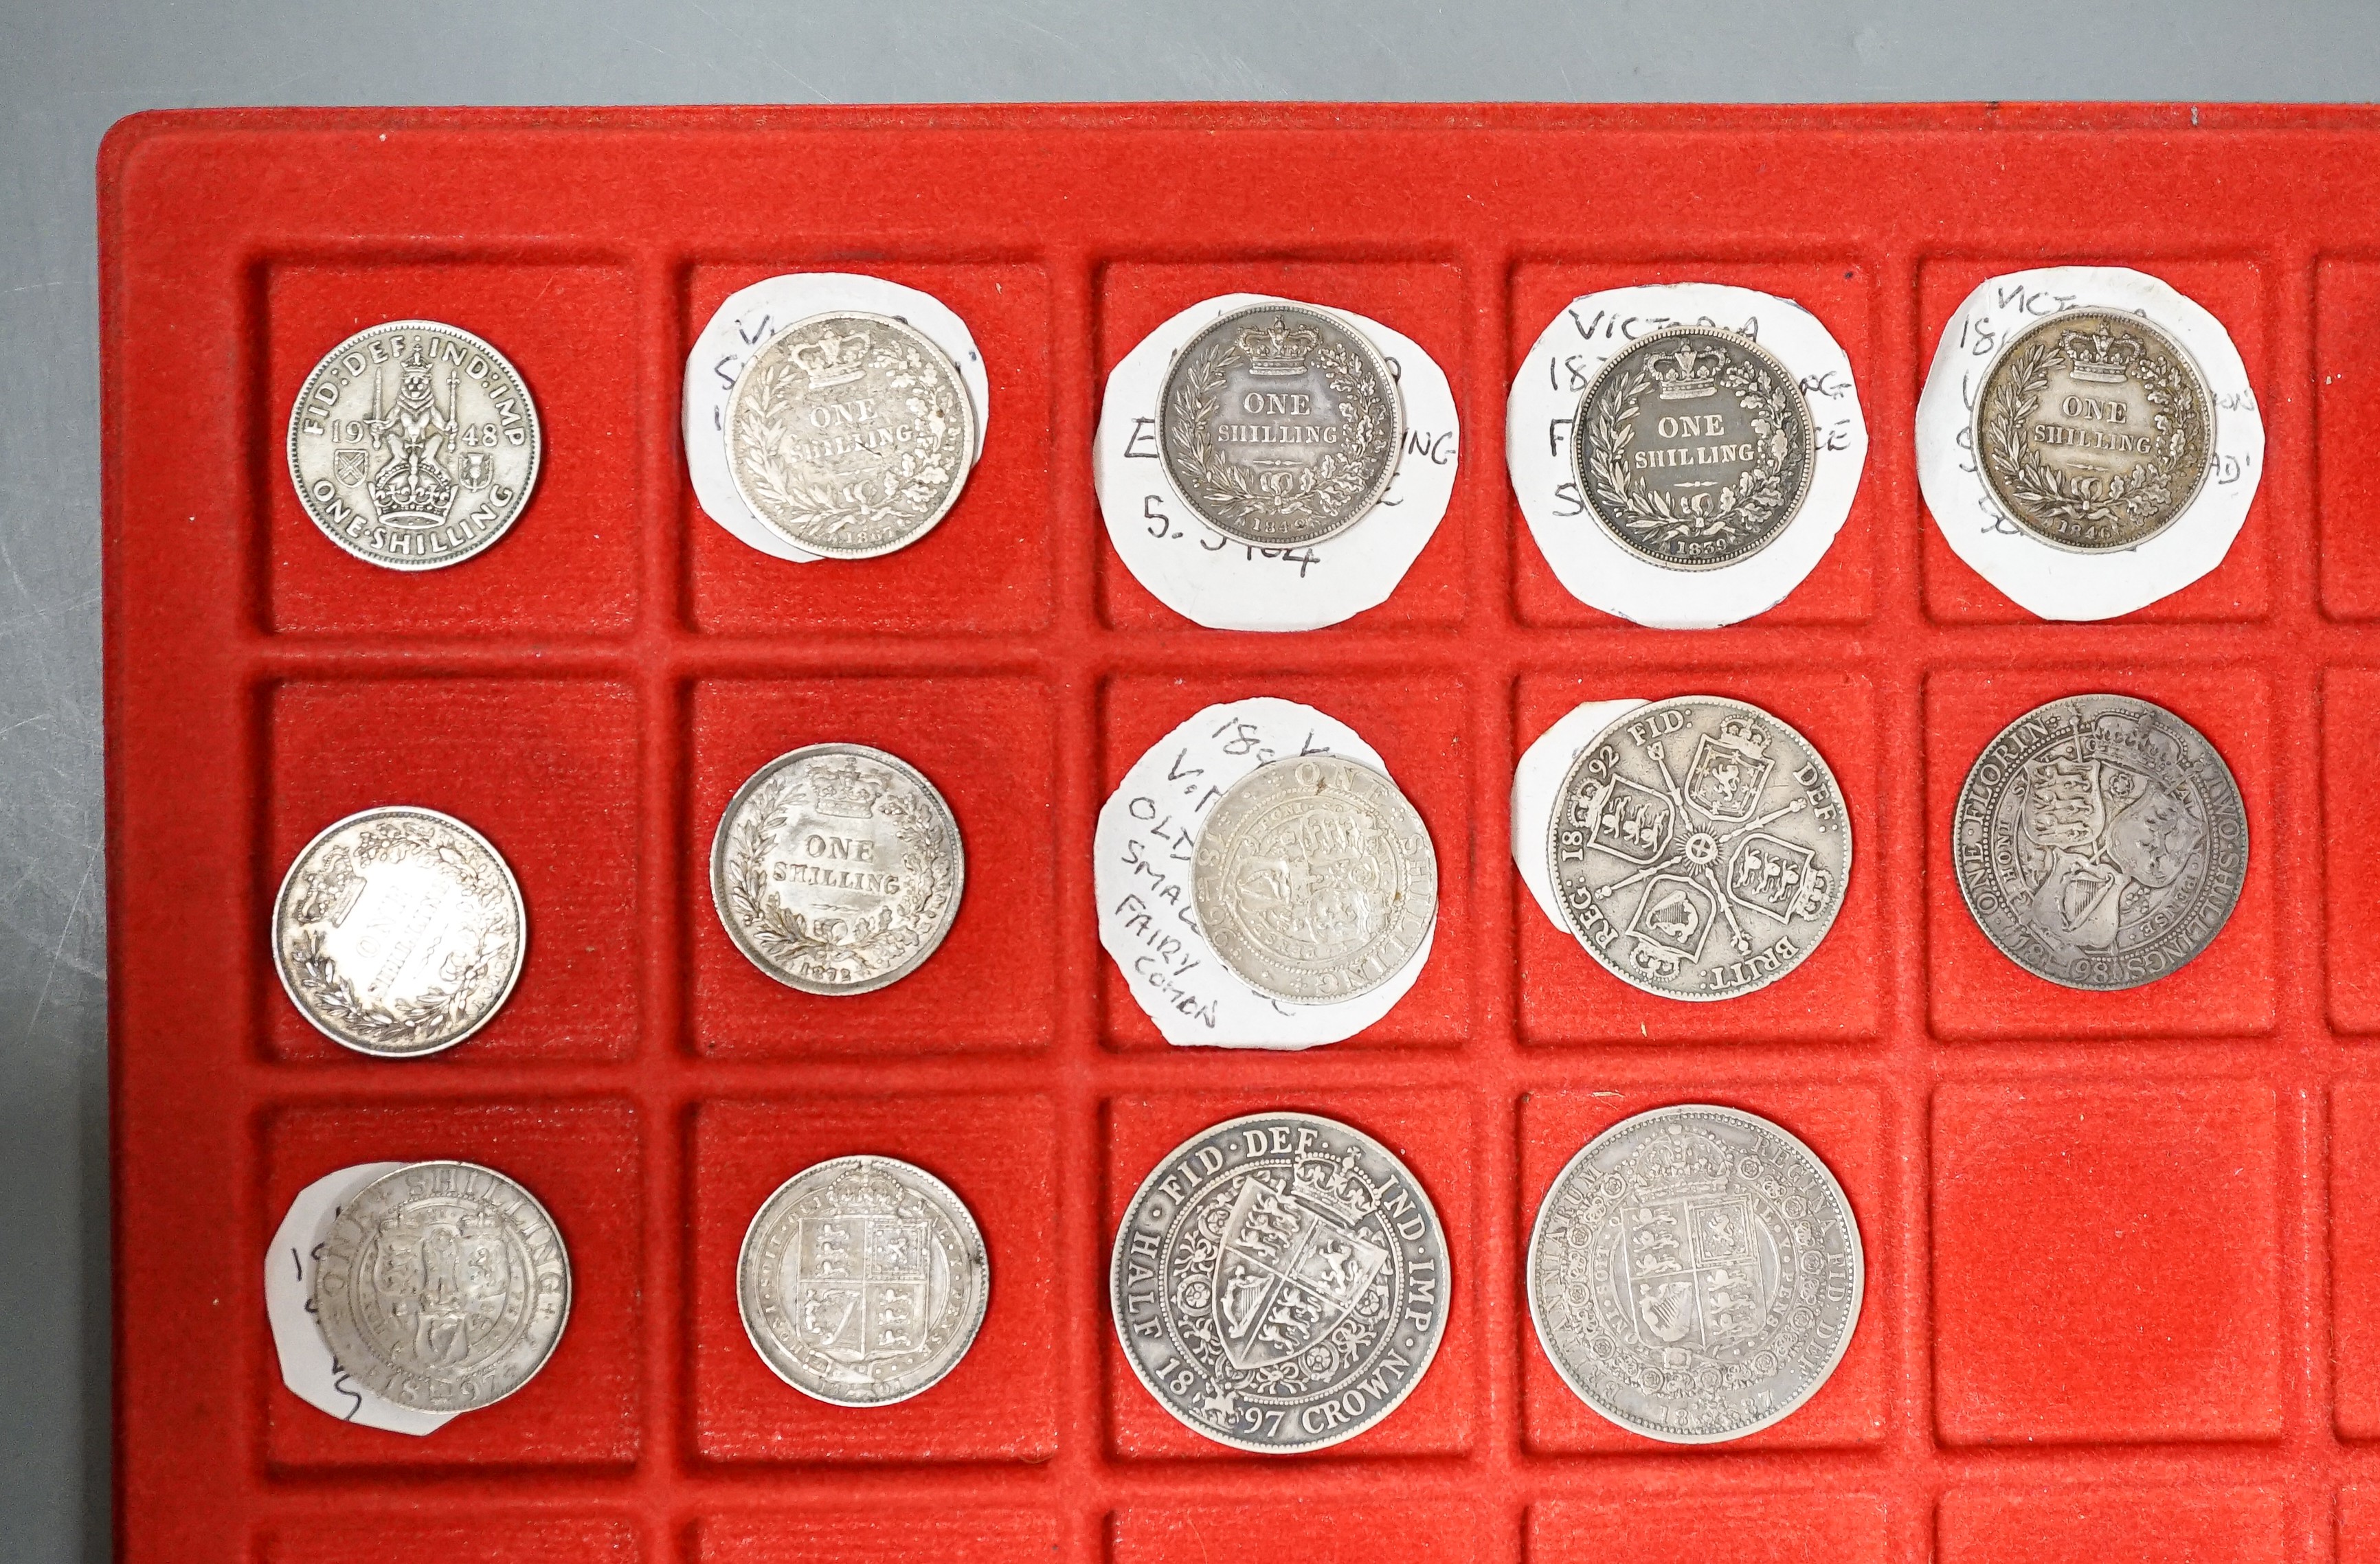 UK coins, Victoria silver coins, halfcrowns 1887, 1897, florins 1892, 1898, shillings 1839, 1846, 1842, 1872, 1818, 1896, 1897 and an 1881 sixpence, VG to EF